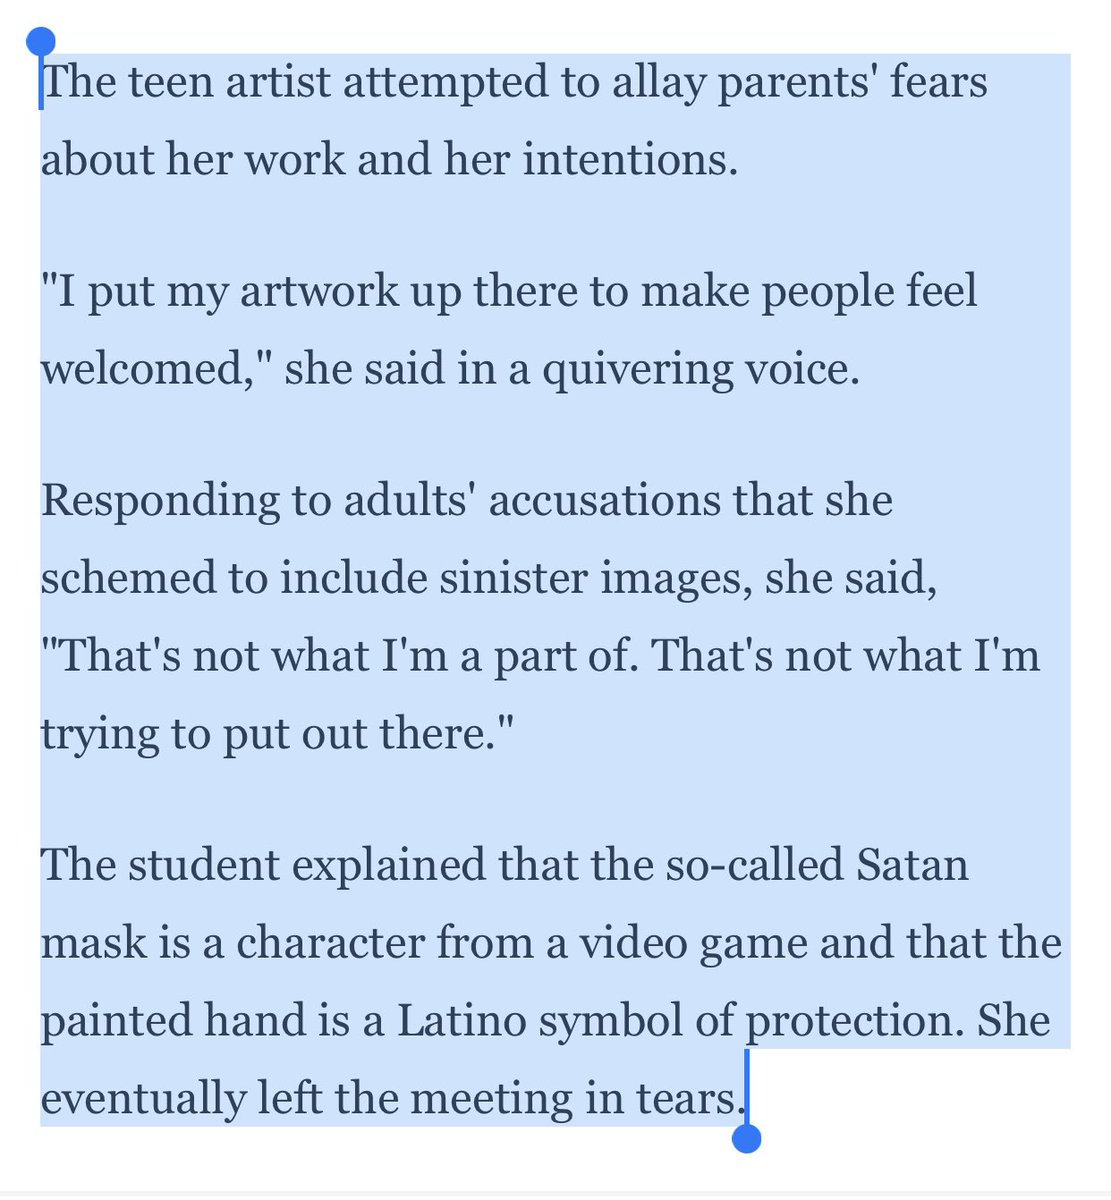 The cruelty towards this teen by the “adults” is so disturbing and horrible.I really can’t understand it.